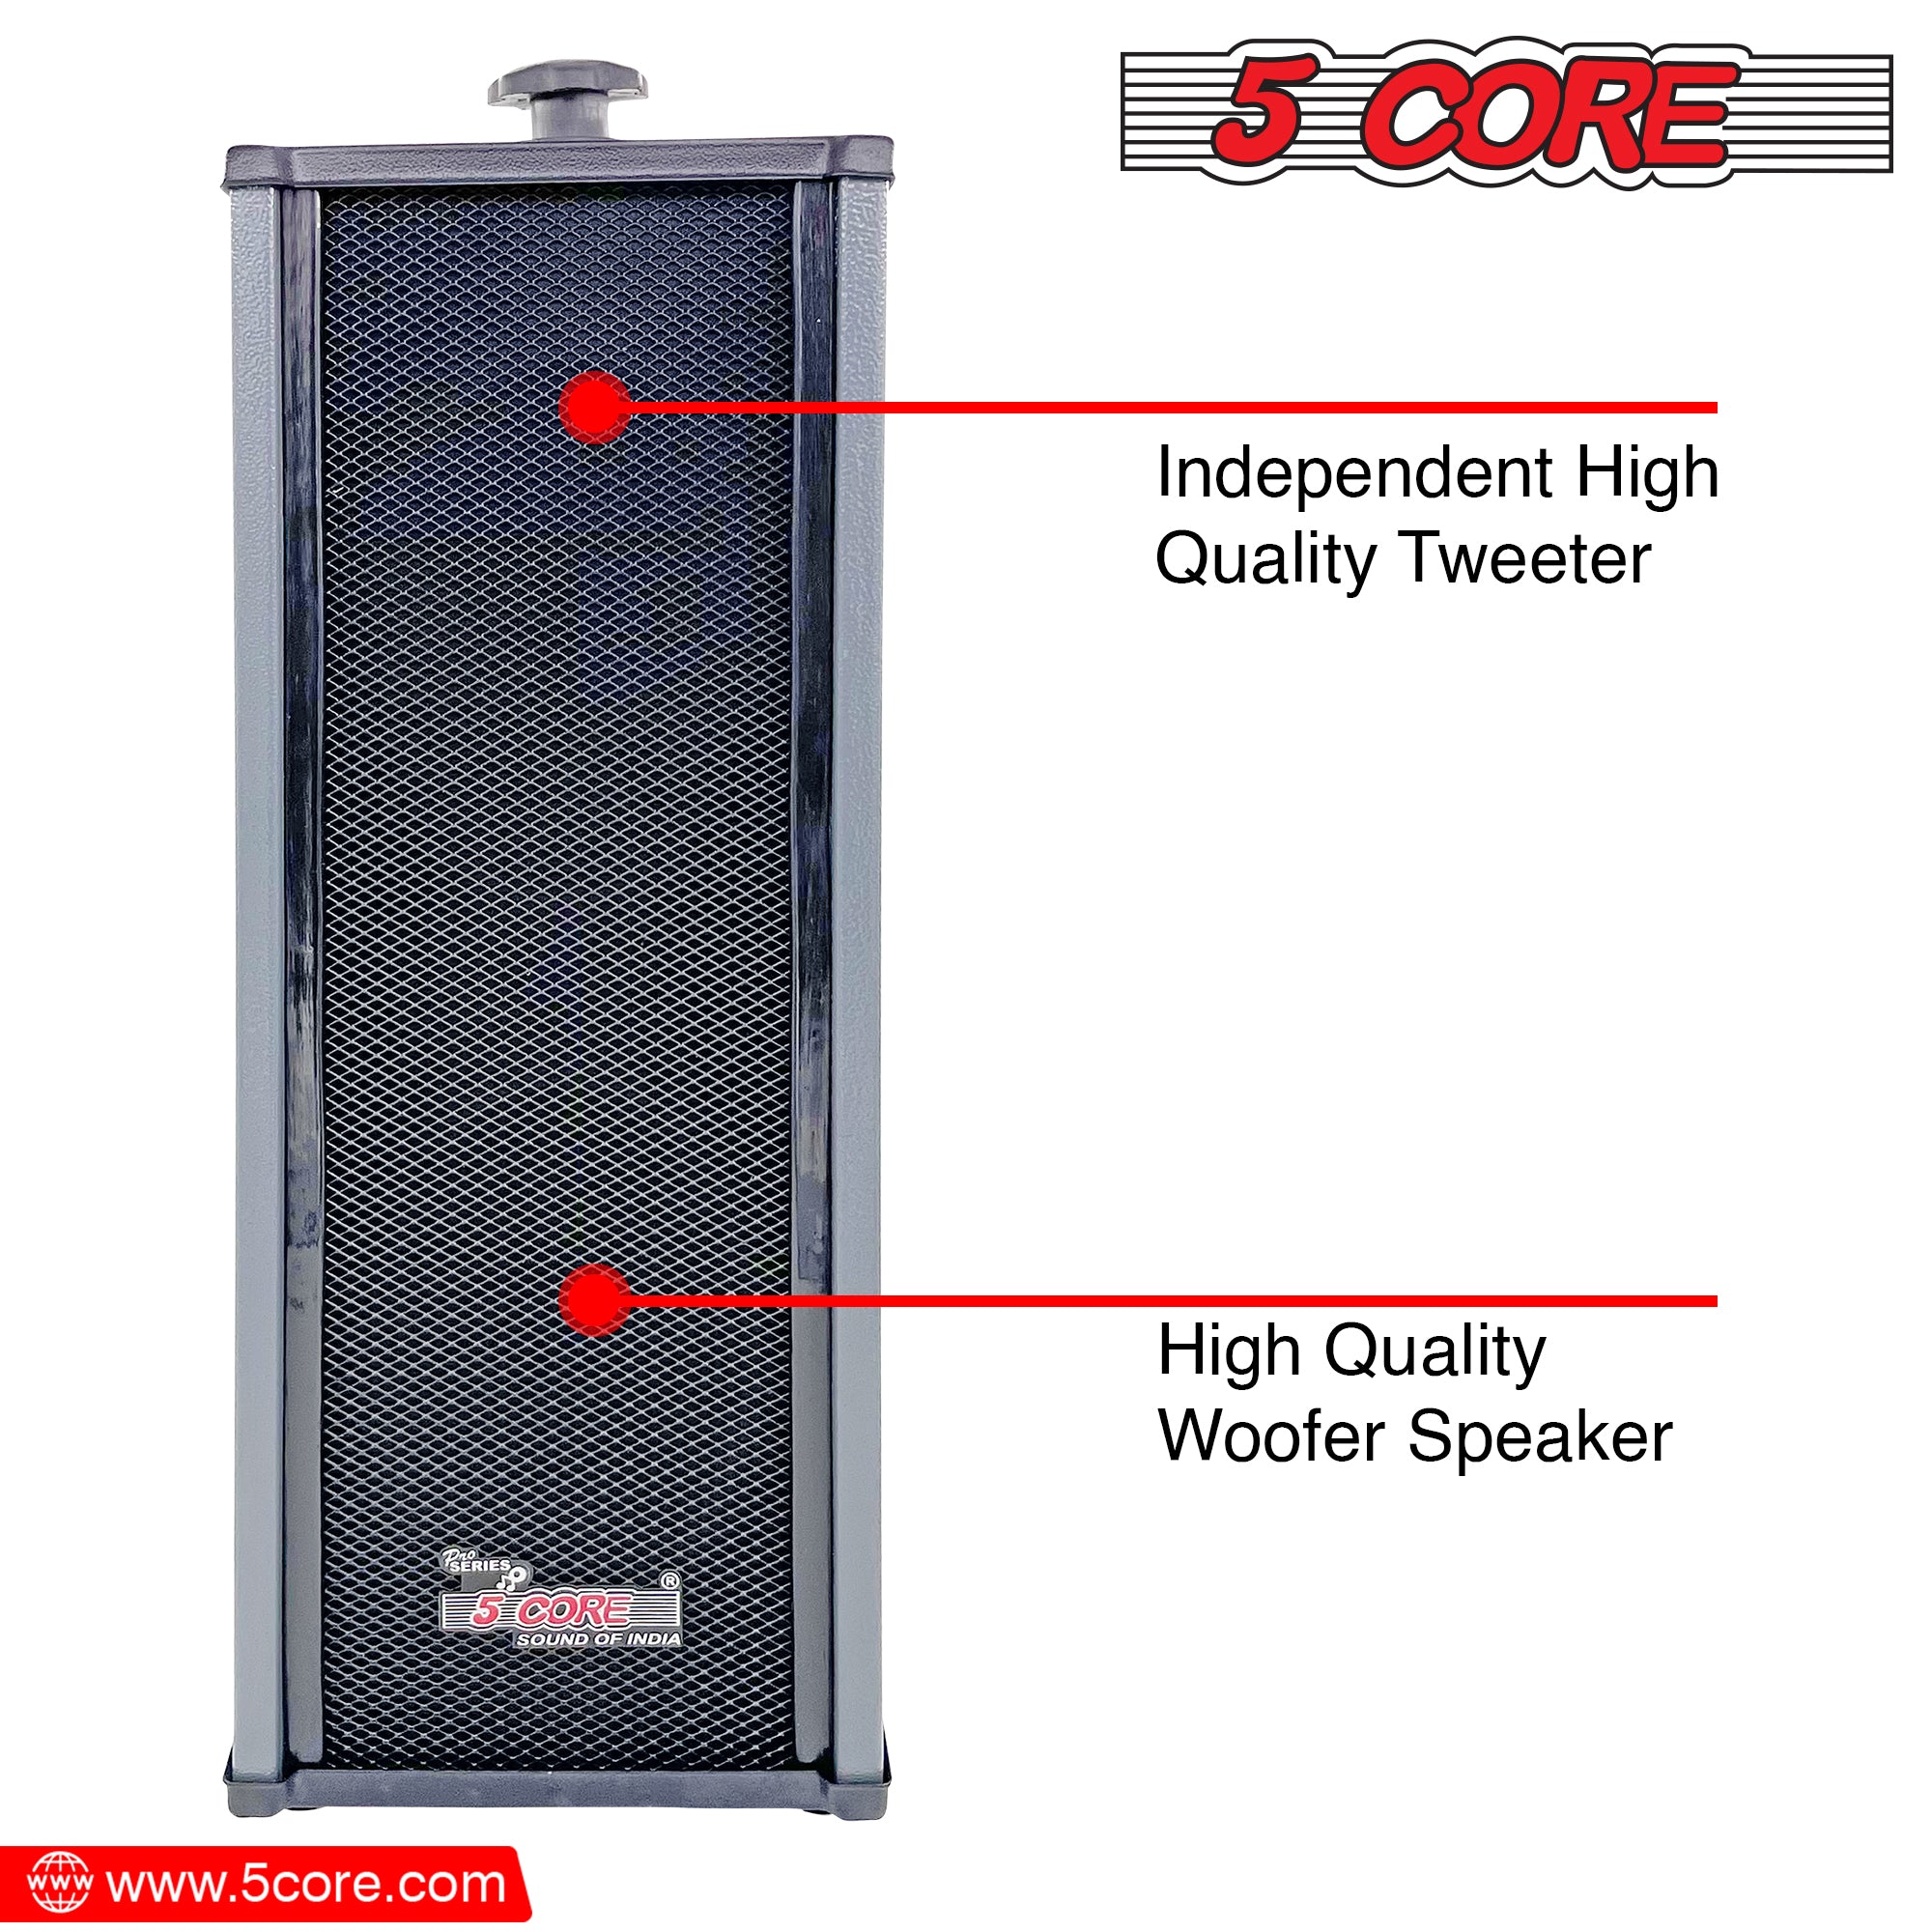 5 Core Wall Speaker System 2Pack • 2 Way 100W PMPO • In-Wall Mount Speakers • Heavy Duty Enclosure